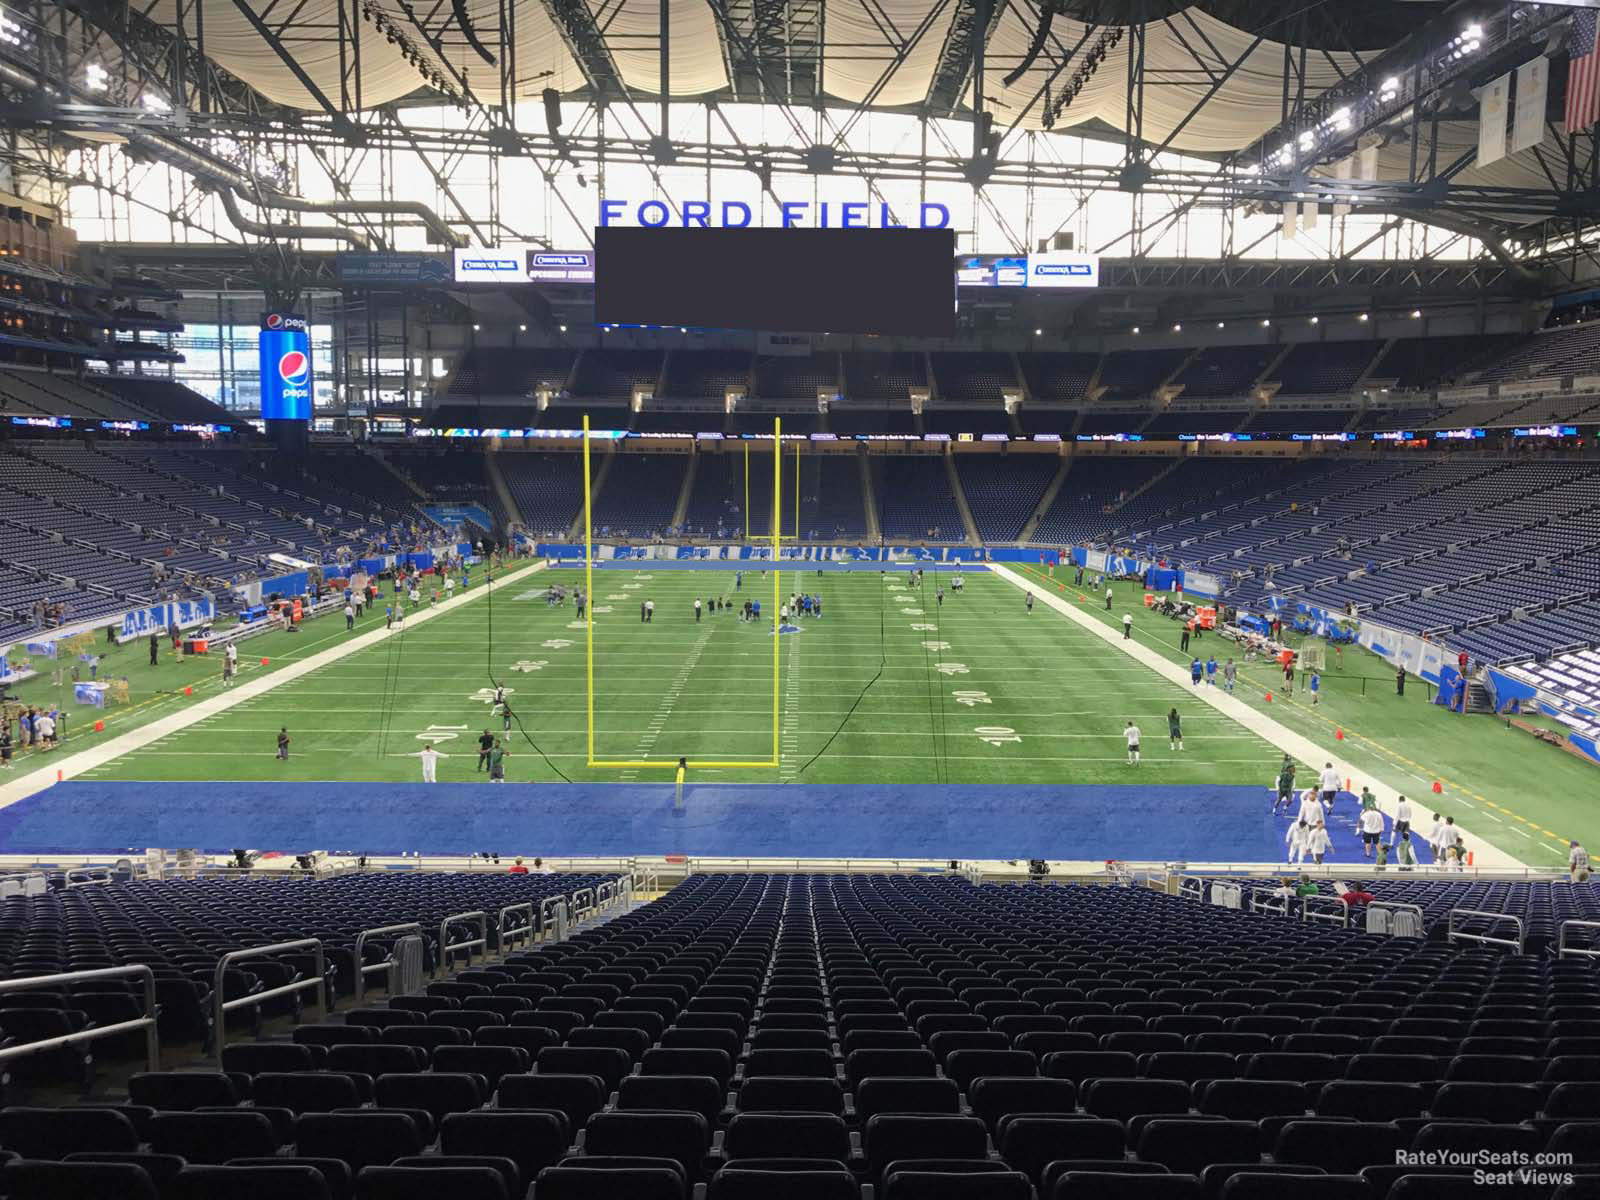 section 117, row 33 seat view  for football - ford field